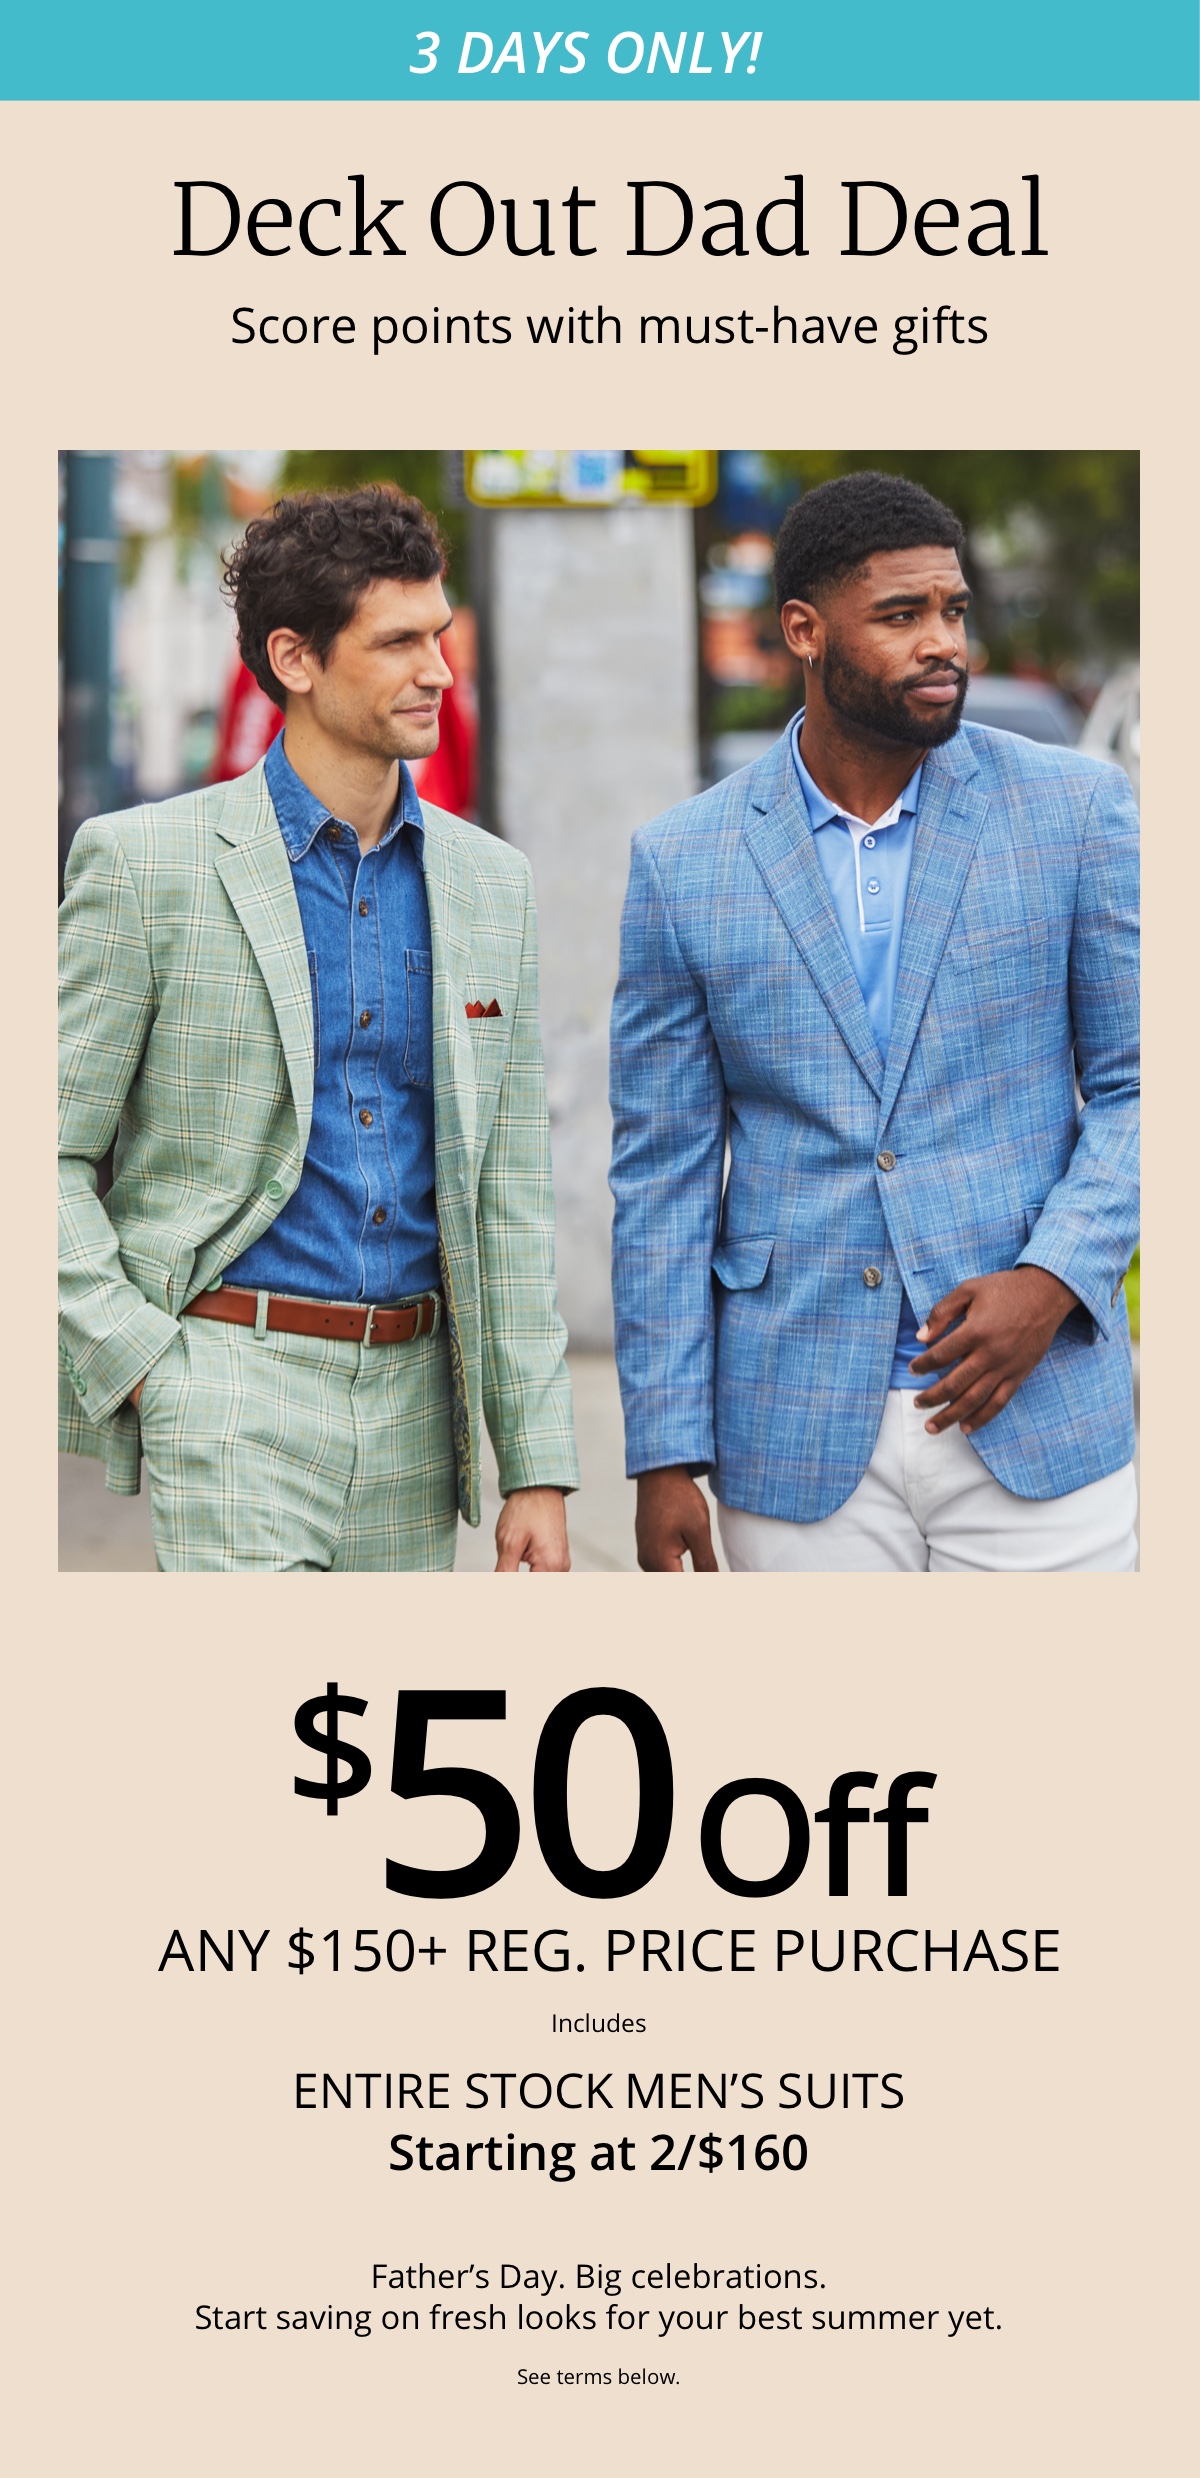 3 Days Only!|Deck Out Dad Deal|Score Points With Must-Have Gifts|$50 Off|Any $150plus Reg Price Purchase|Entire Stock Men's Suits | Starting at 2/$160|Father's Day Big Celebrations. Start saving on fresh looks for your best summer yet|See terms below.